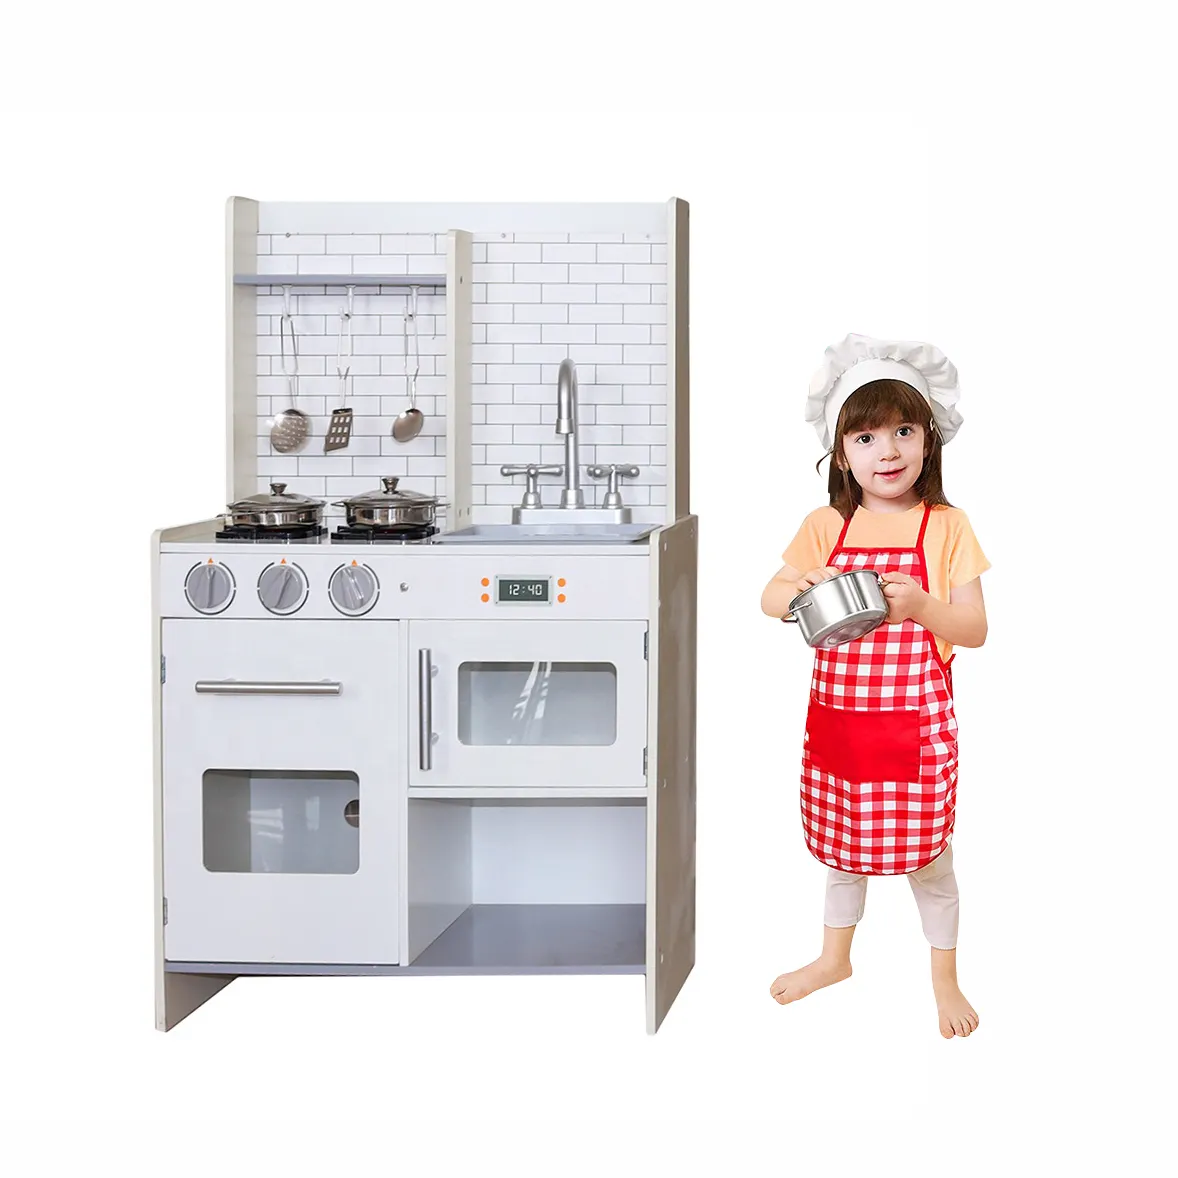 Kids Role Play Pretend Wooden Vintage Play Kitchen with Burners Faucet Microwave Cooking 5pcs metal accessories